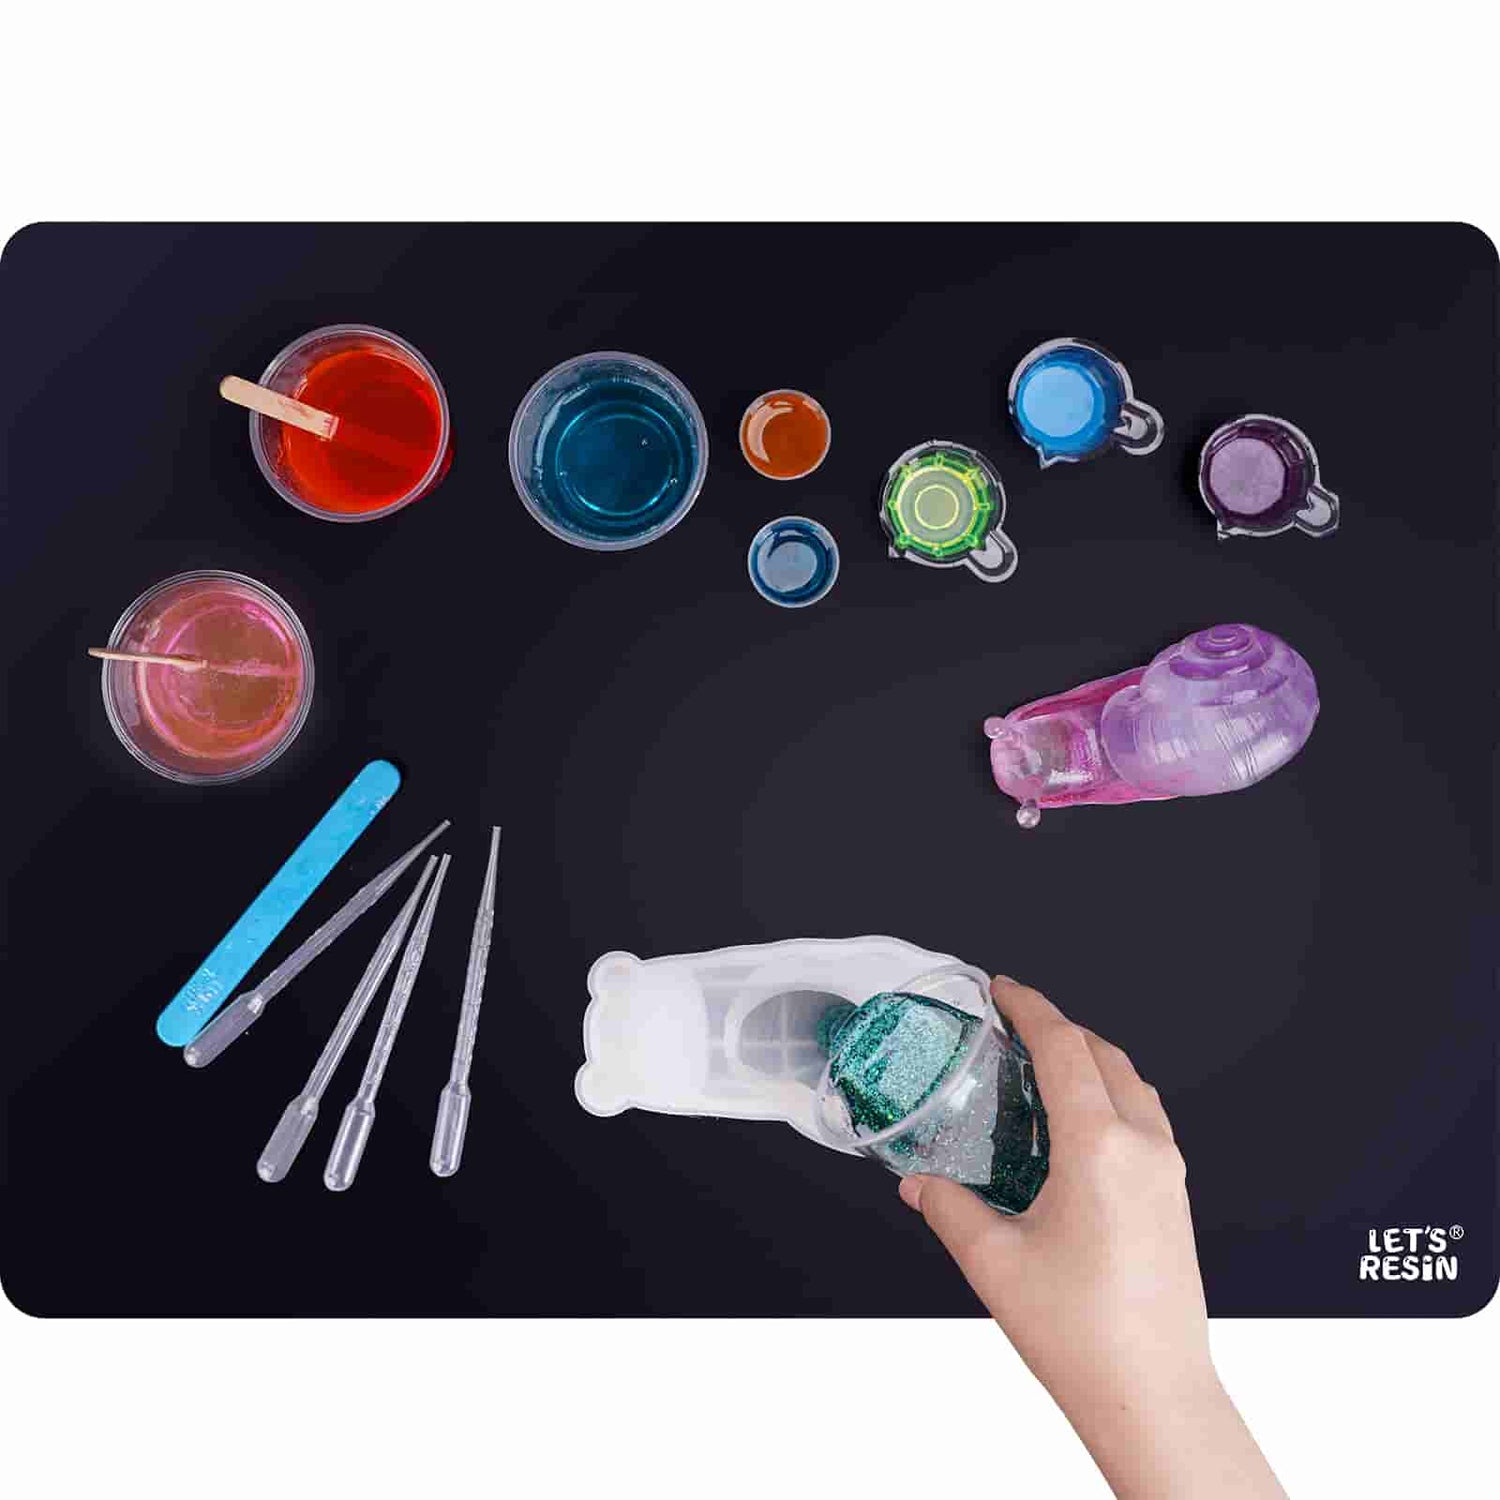 LET'S RESIN Extra Large Silicone Mat for Crafts, 27.7'' x 19.7'' Black  Large Silicone Sheets for Resin Jewelry Casting Molds, Nonskid Multipurpose  Mat, Crafts Mat for Epoxy Resin, Art Painting – Let's